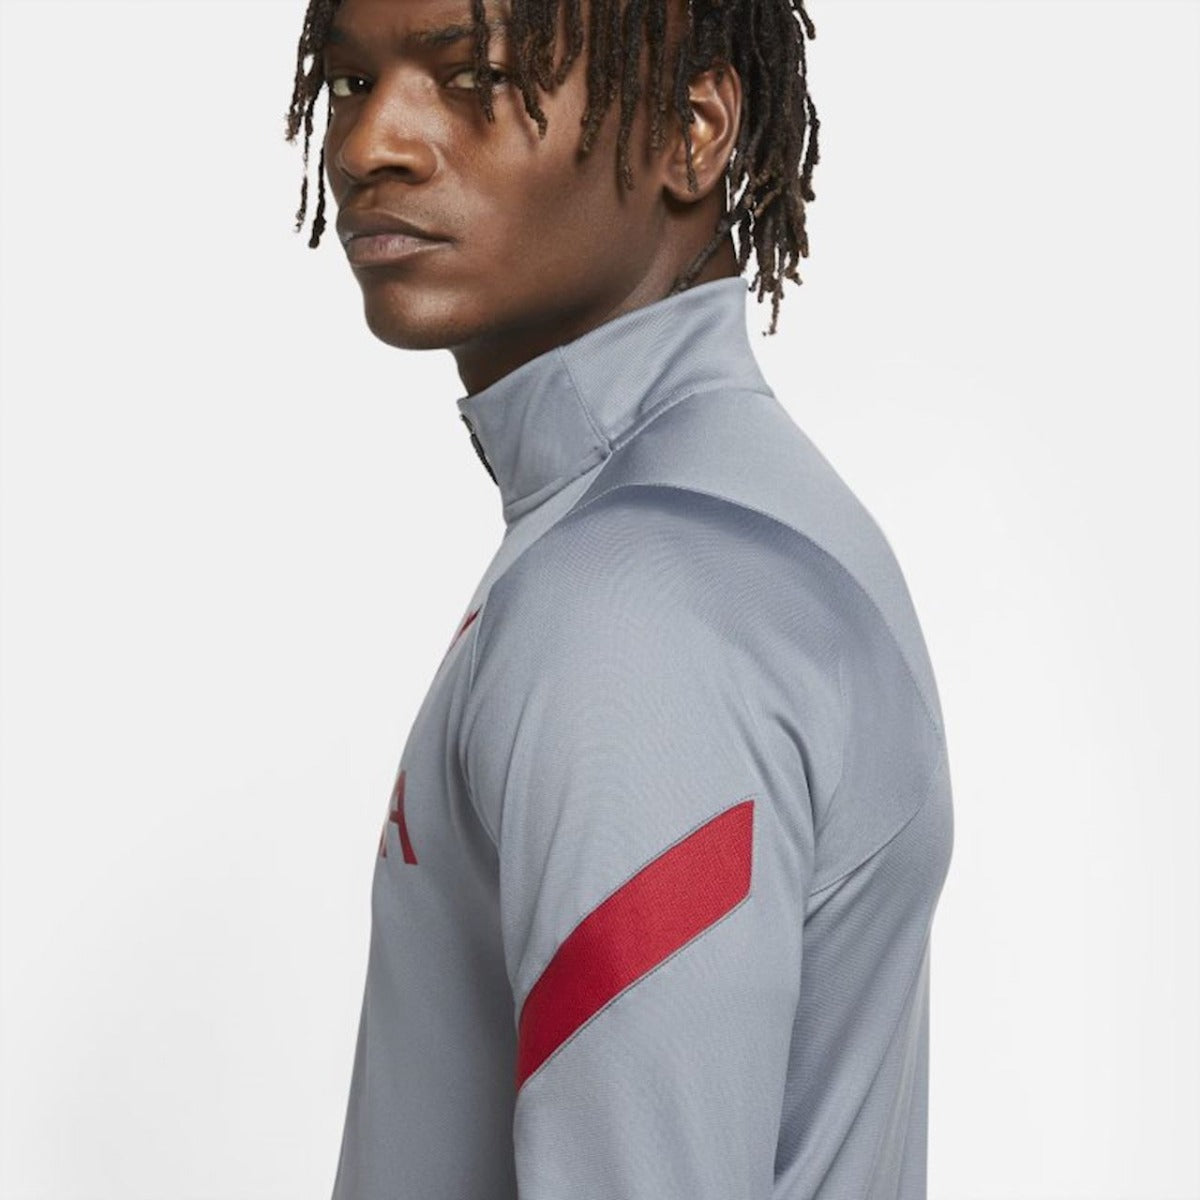 Nike 2020-21 Liverpool Dry-Fit Strike Top - Light Grey-Red